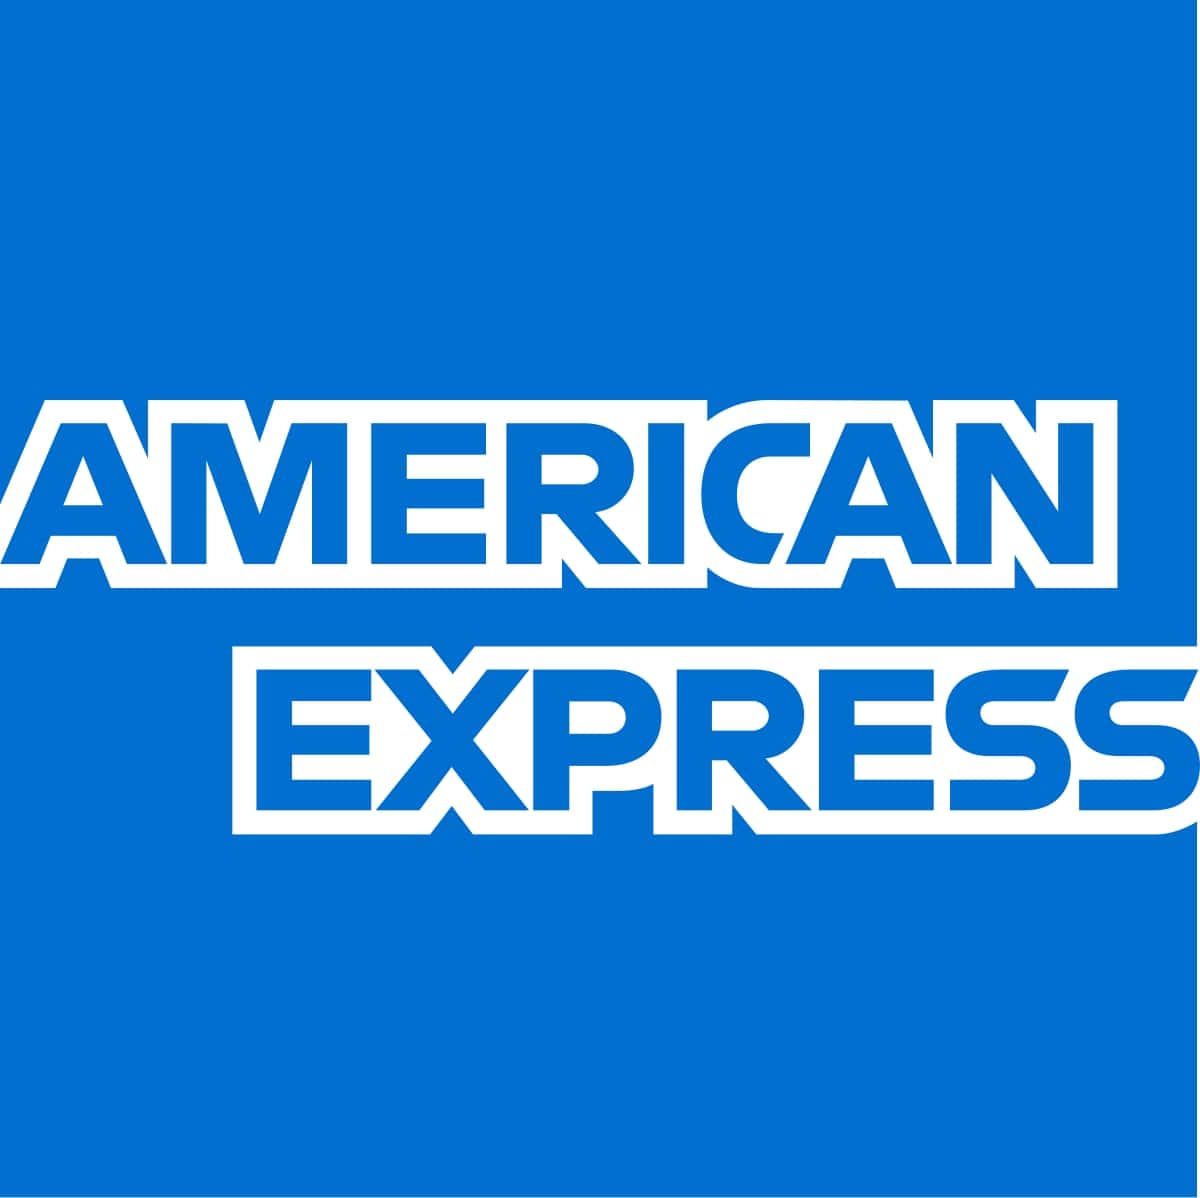 american express group travel